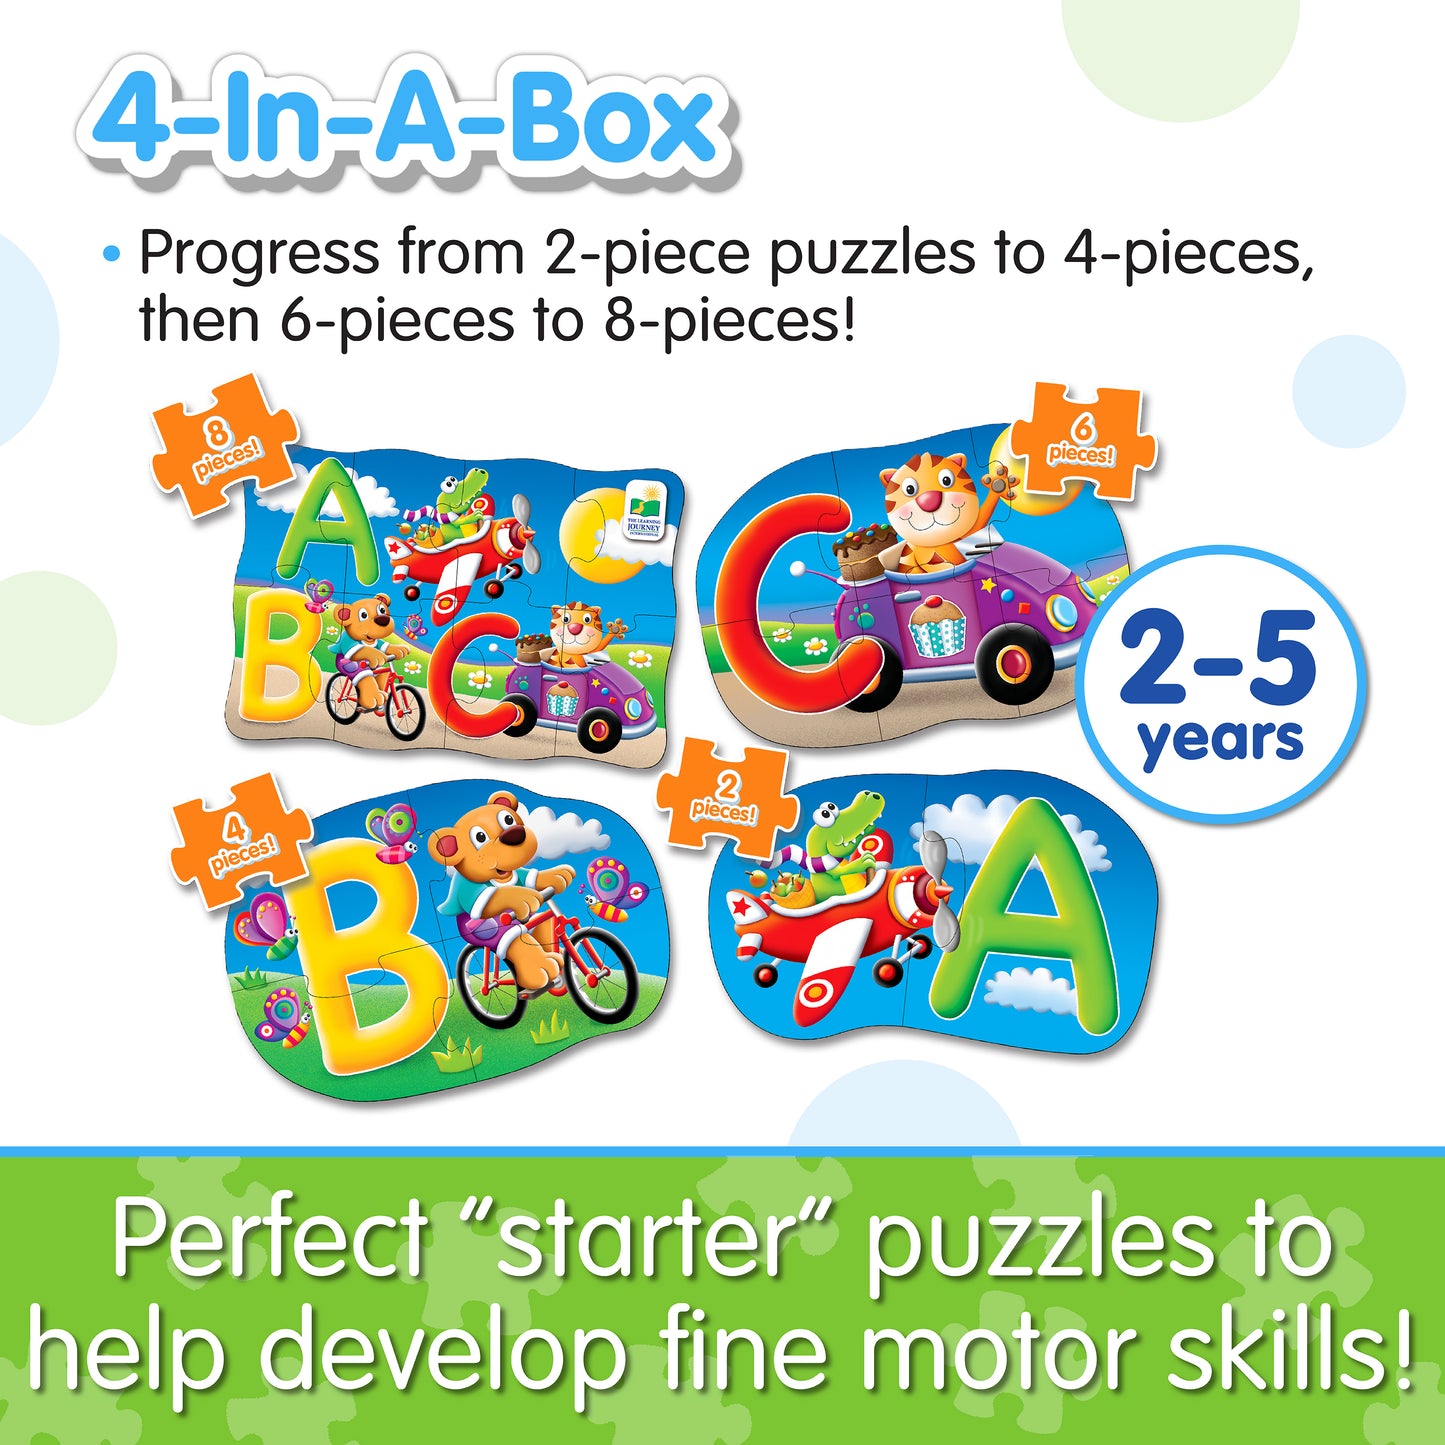 Infographic about 4-In-A-Box ABC Puzzle's features that says, "Perfect 'starter' puzzles to help develop fine motor skills!"